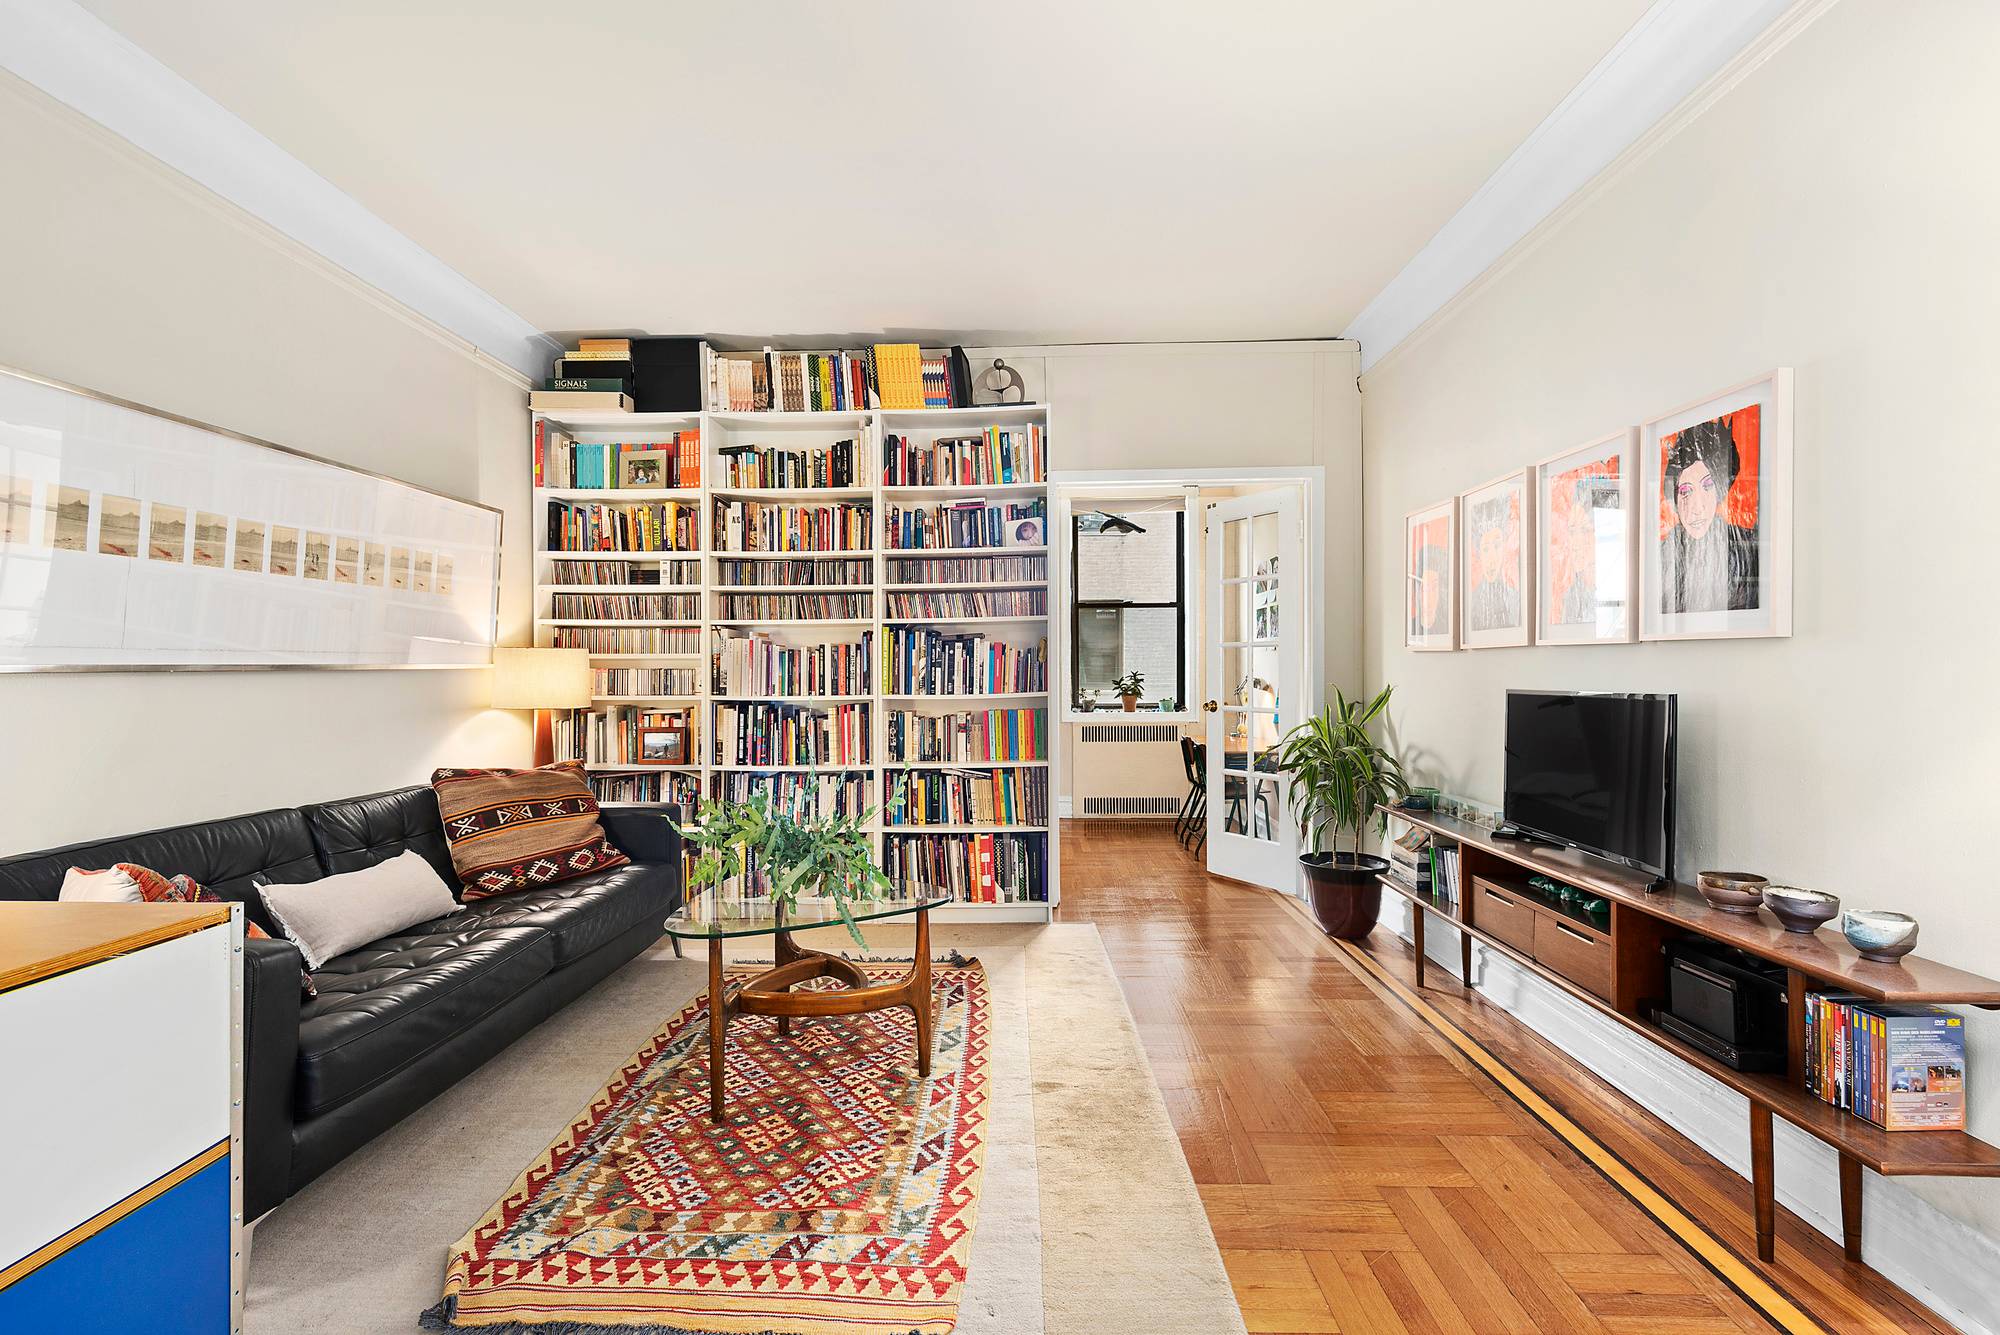 Welcome home to this incredible one bedroom convertible two, top floor coop perfectly located at the intersection of Prospect Lefferts, Ditmas Park and Flatbush.